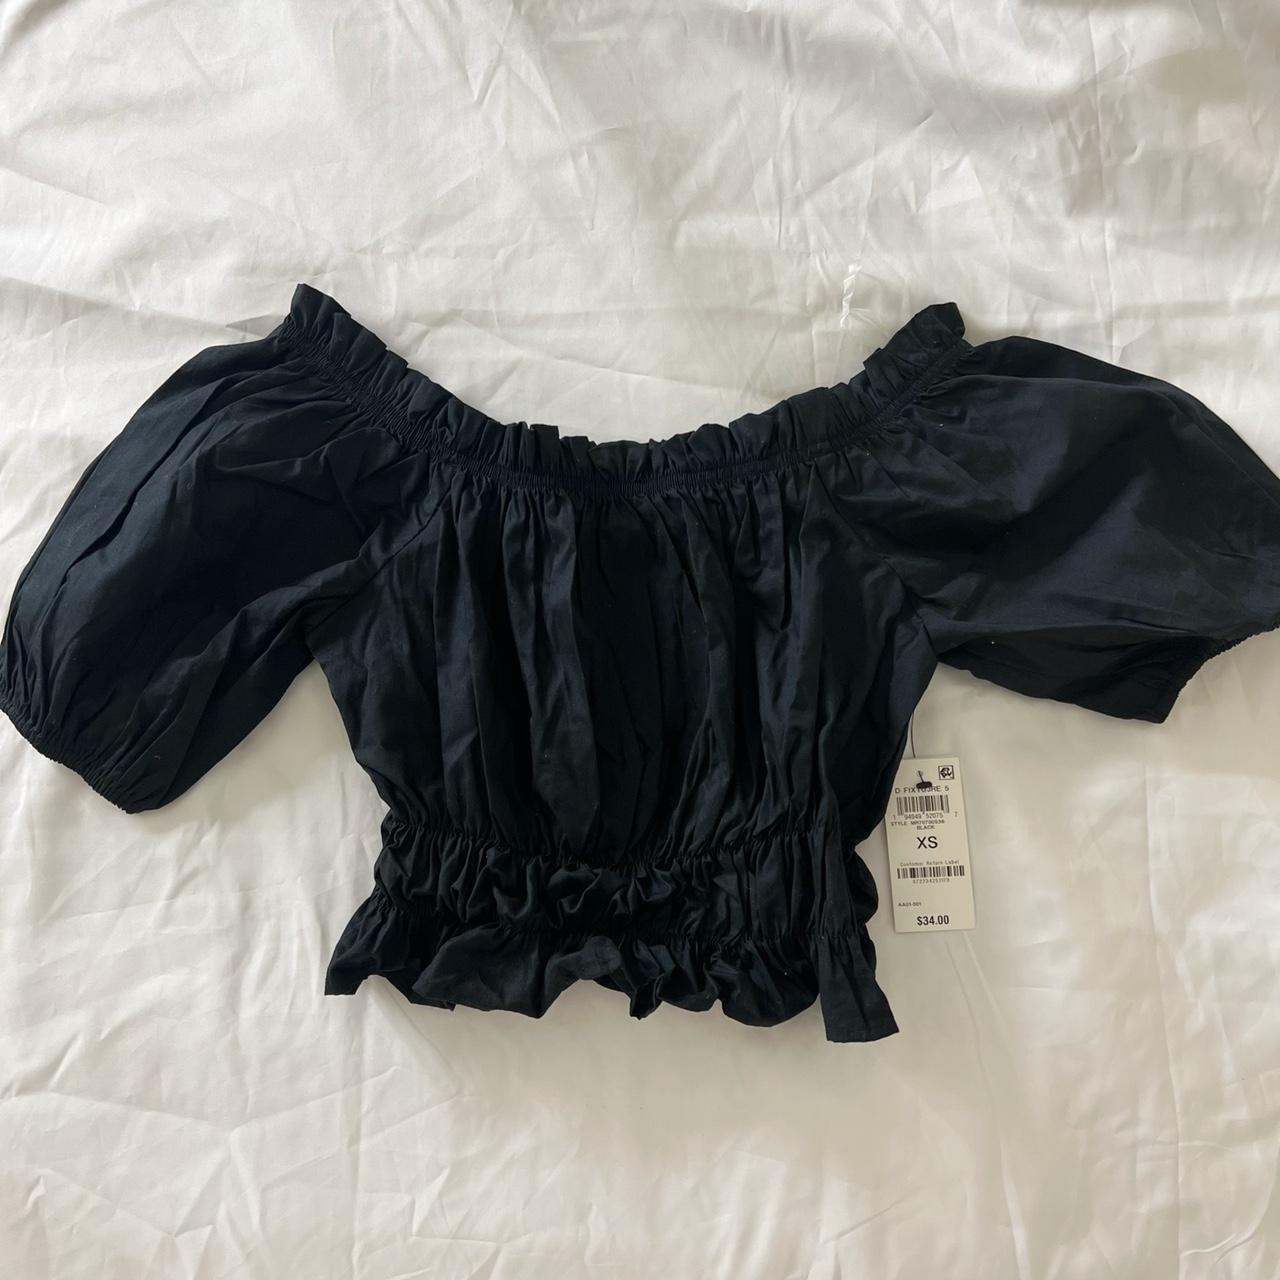 Product Image 3 - BNWT black off the shoulder